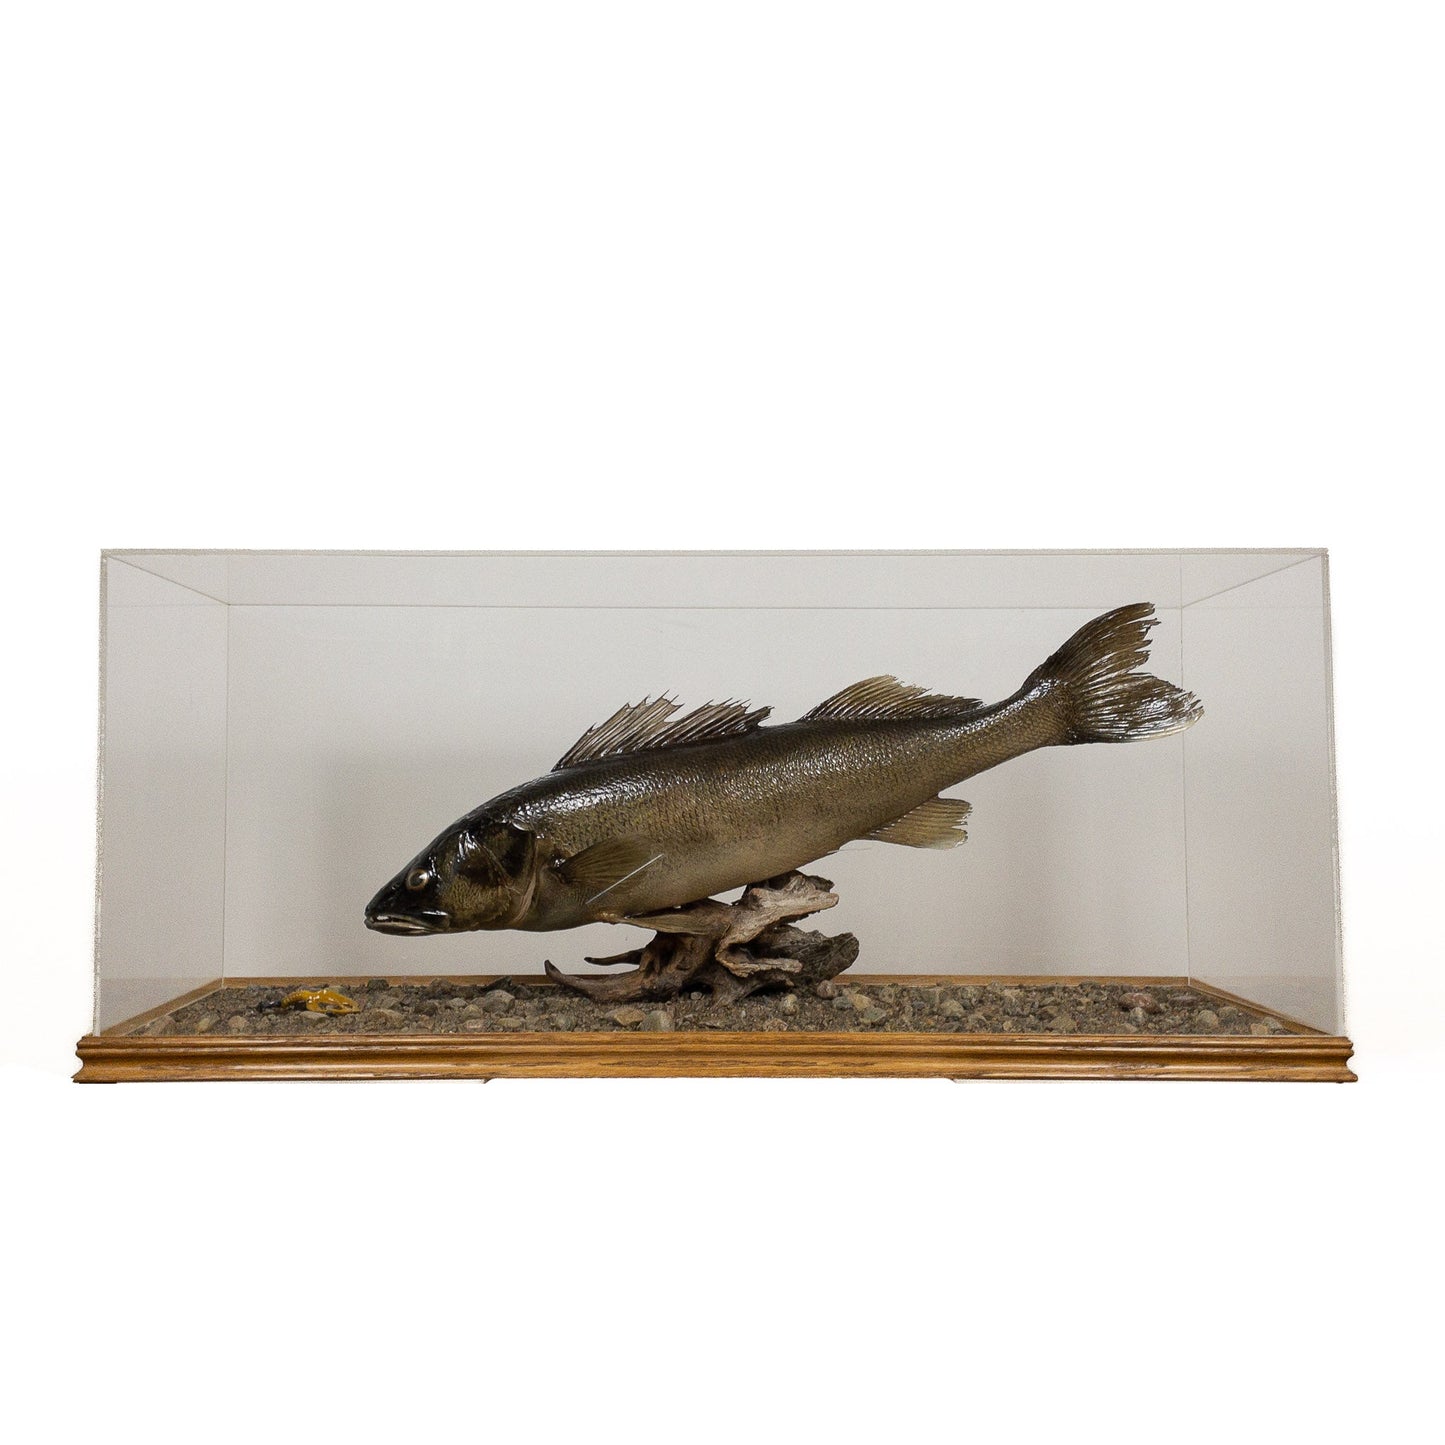 A Home Decor Taxidermy Fish Mount in Glass Showcase Walleye Glass Show case of Grade Remarkable